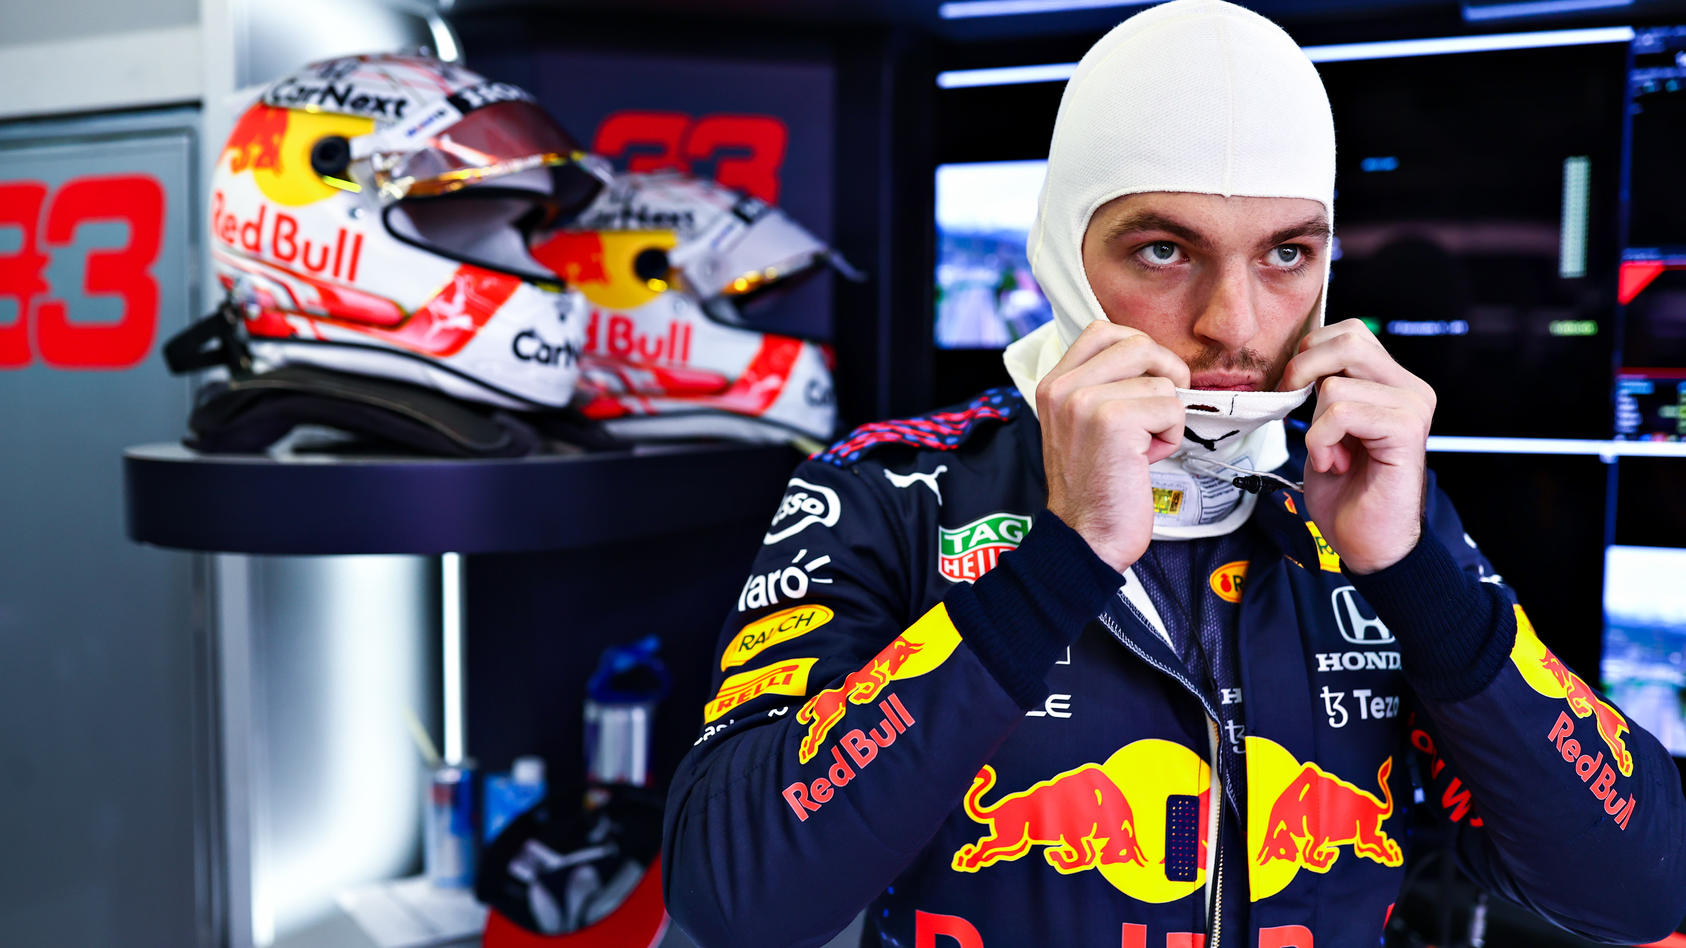 SOCHI, RUSSIA - SEPTEMBER 24: Max Verstappen of Netherlands and Red Bull Racing prepares to drive in the garage during practice ahead of the F1 Grand Prix of Russia at Sochi Autodrom on September 24, 2021 in Sochi, Russia. (Photo by Mark Thompson/Get